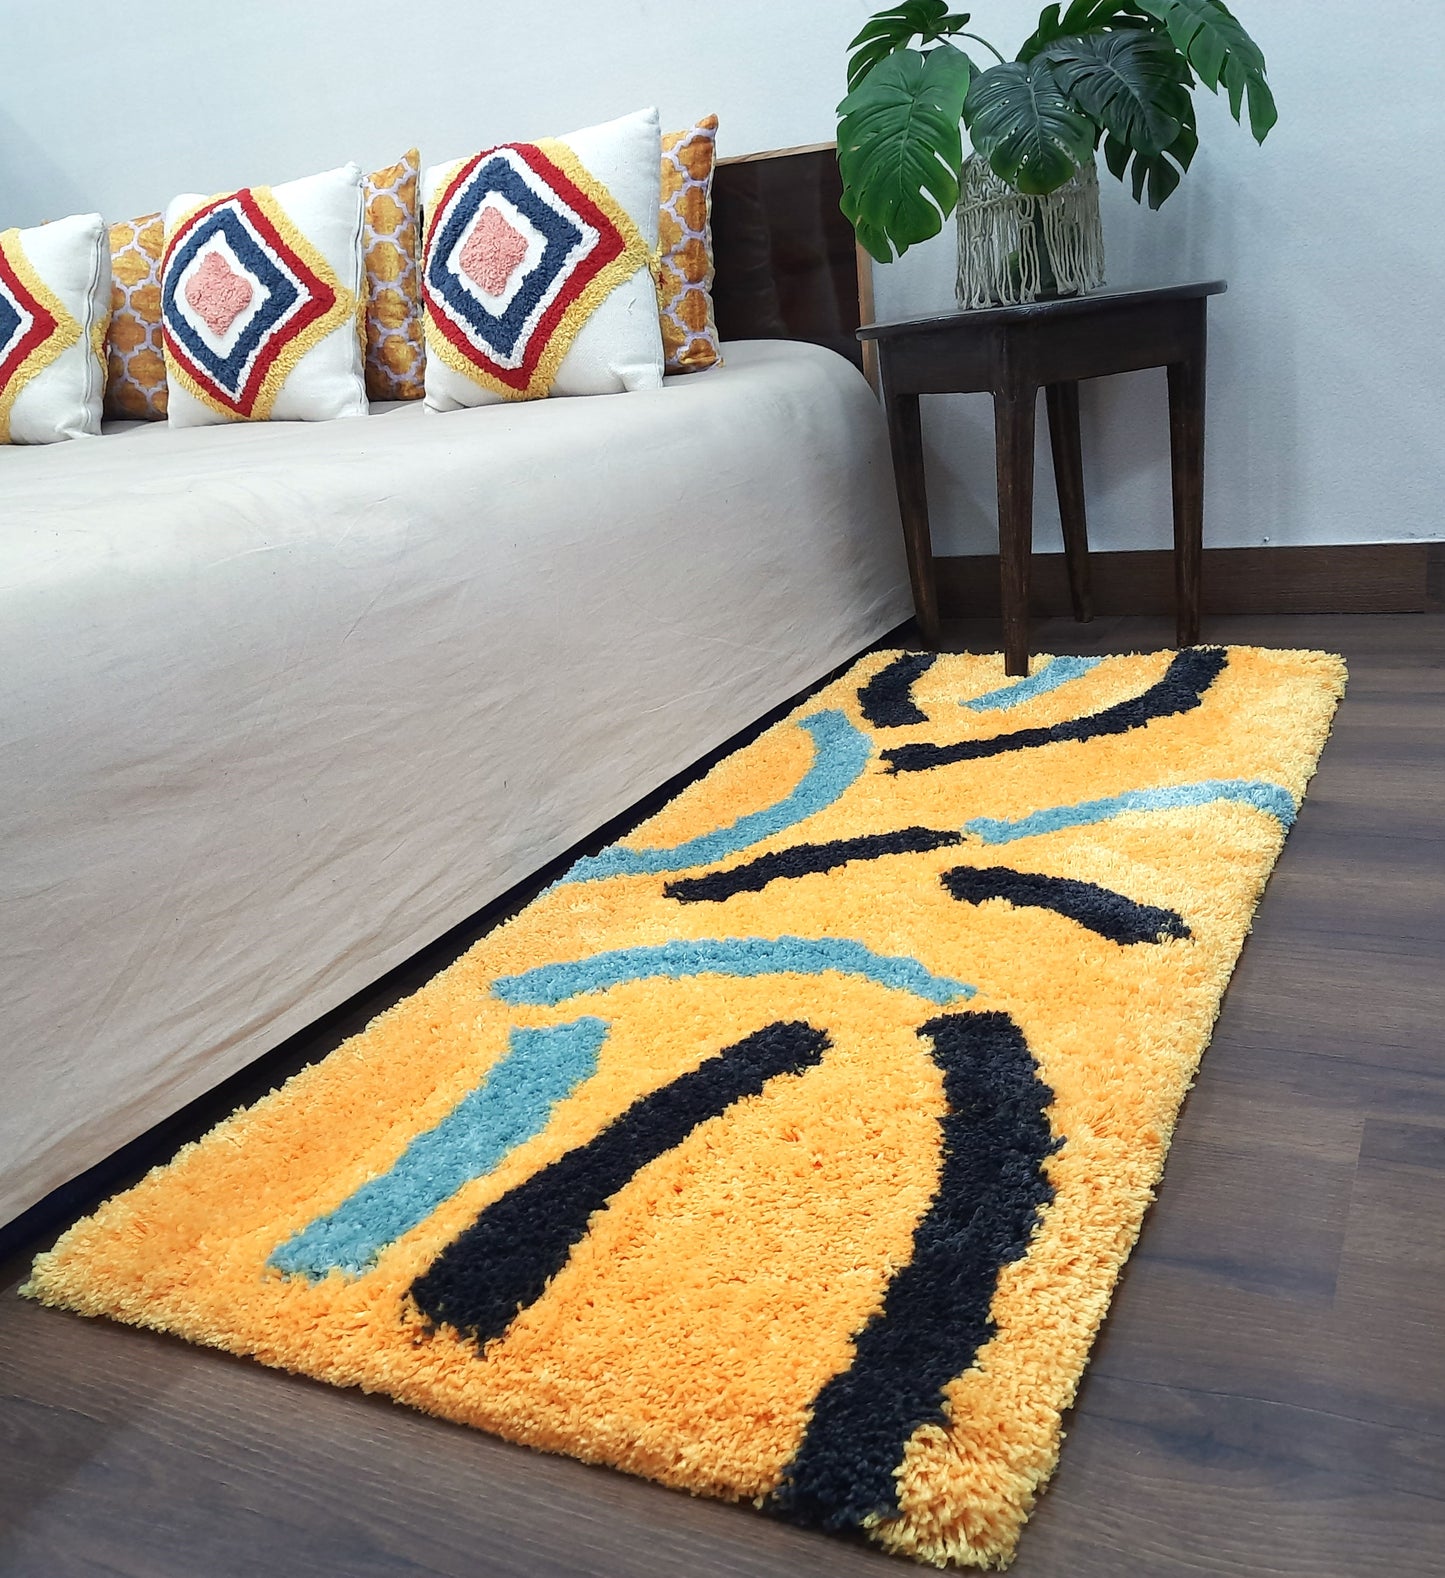 Plush Premium Shaggy Golden Yellow Base & Multi Colour With Modern Design /Bedside Runners by Avioni Home